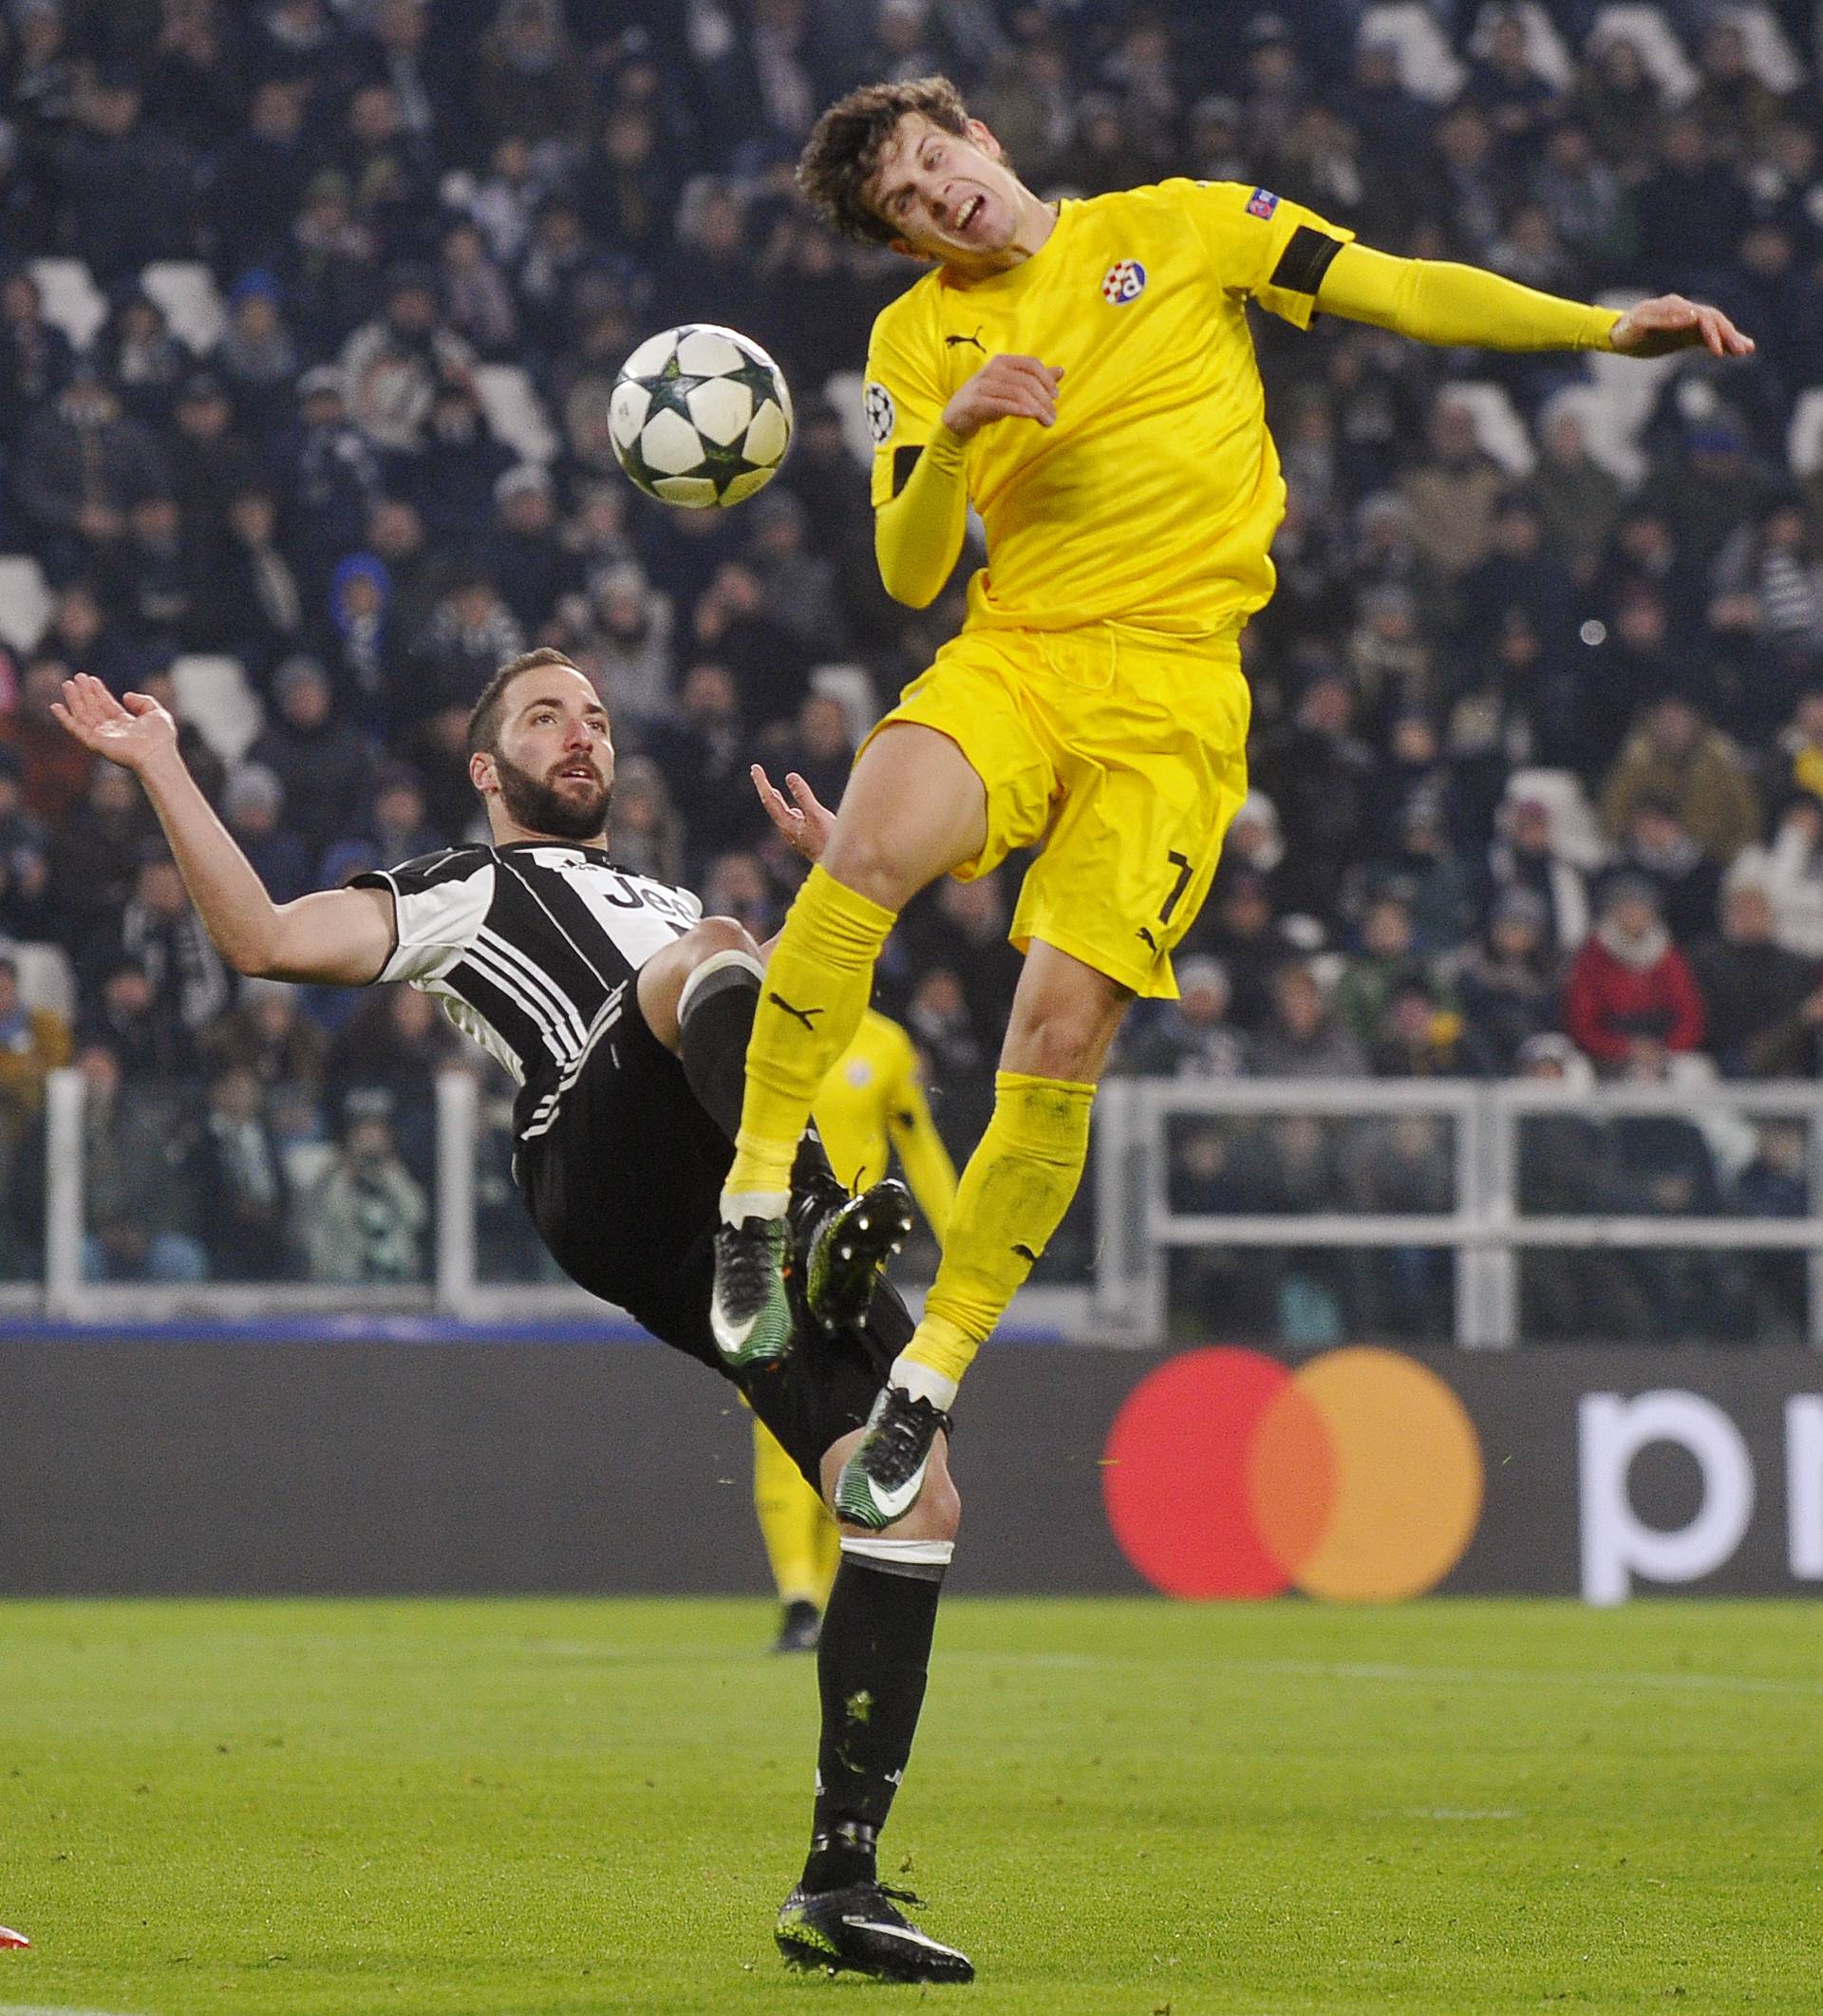 Dinamo Zagreb's Mario Situm in action with Juventus' Gonzalo Higuain